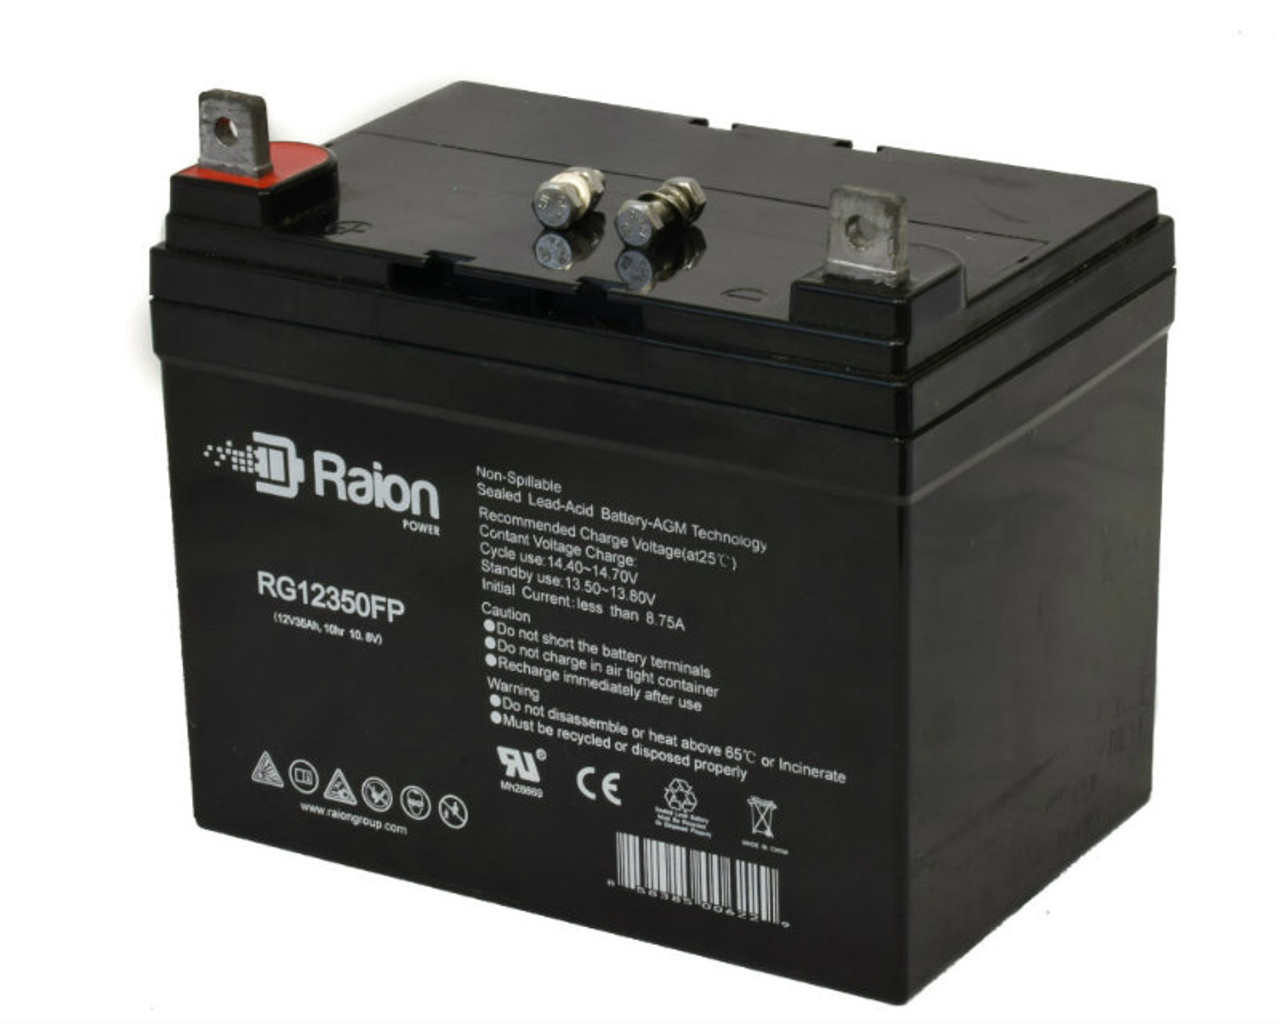 Raion Power Replacement 12V 35Ah RG12350FP Battery for Sabre (By John Deere) 1848HV